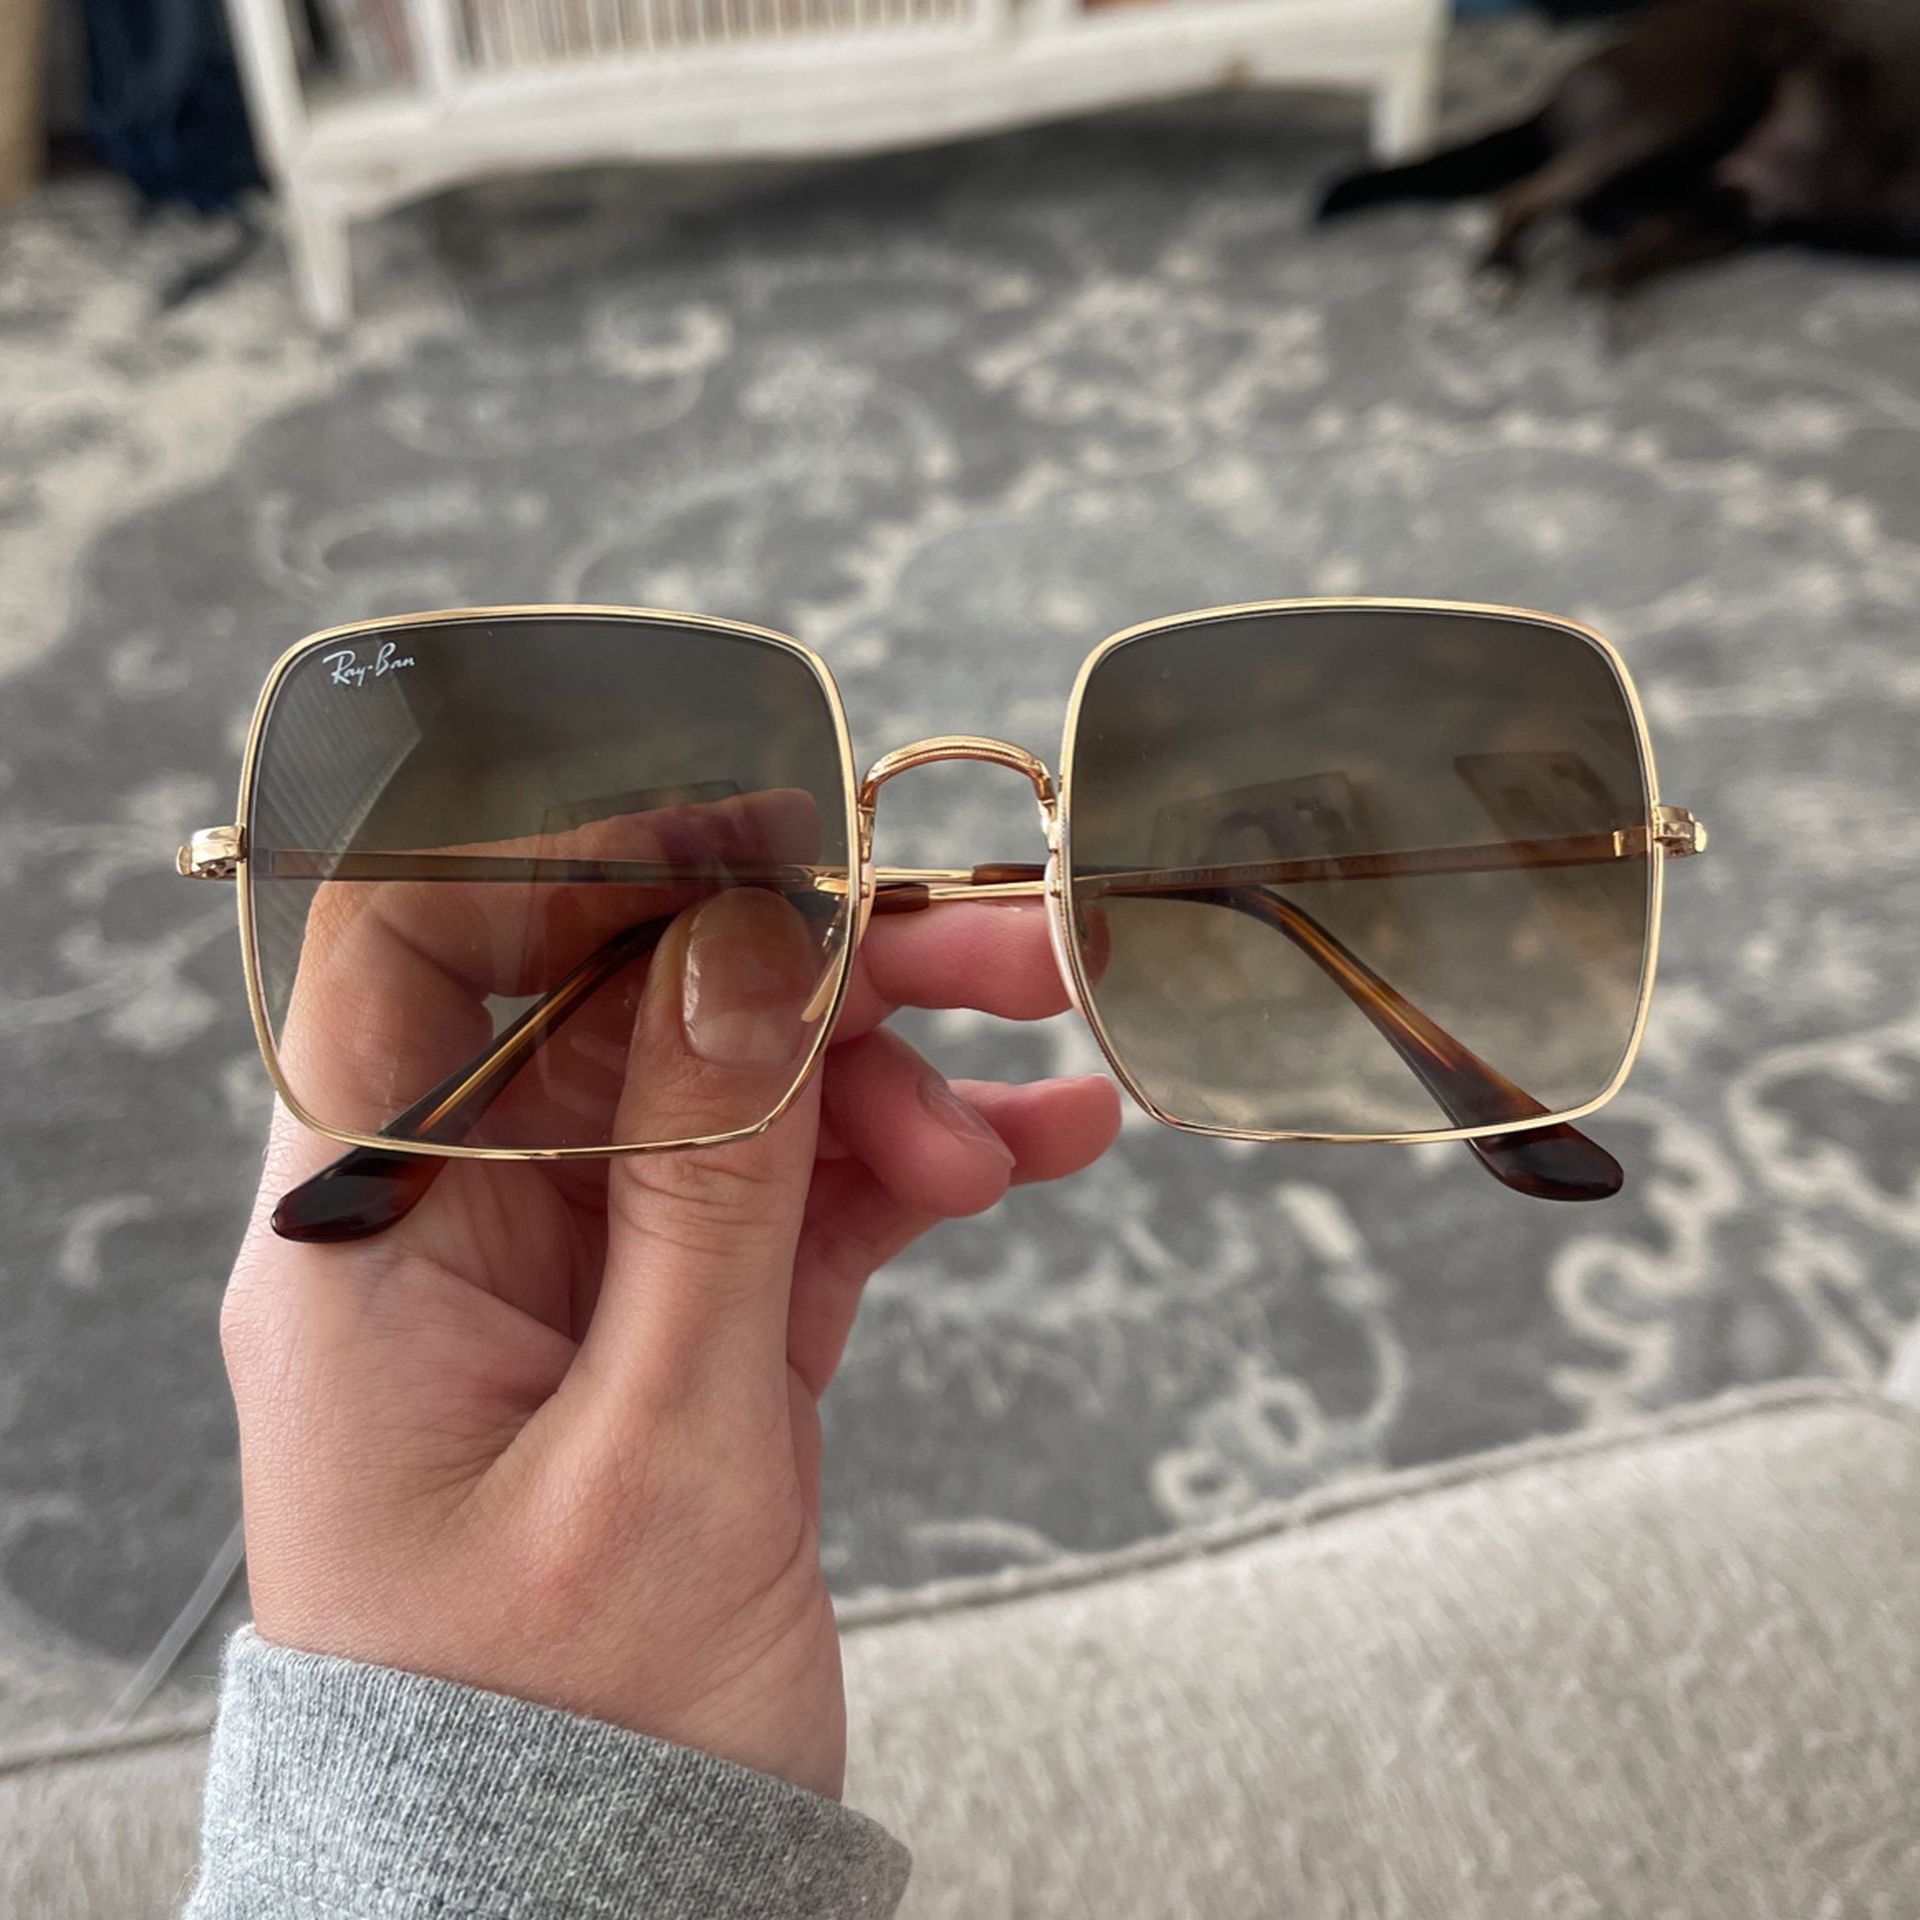 Ray ban sunglasses for Sale in Round Rock, TX - OfferUp